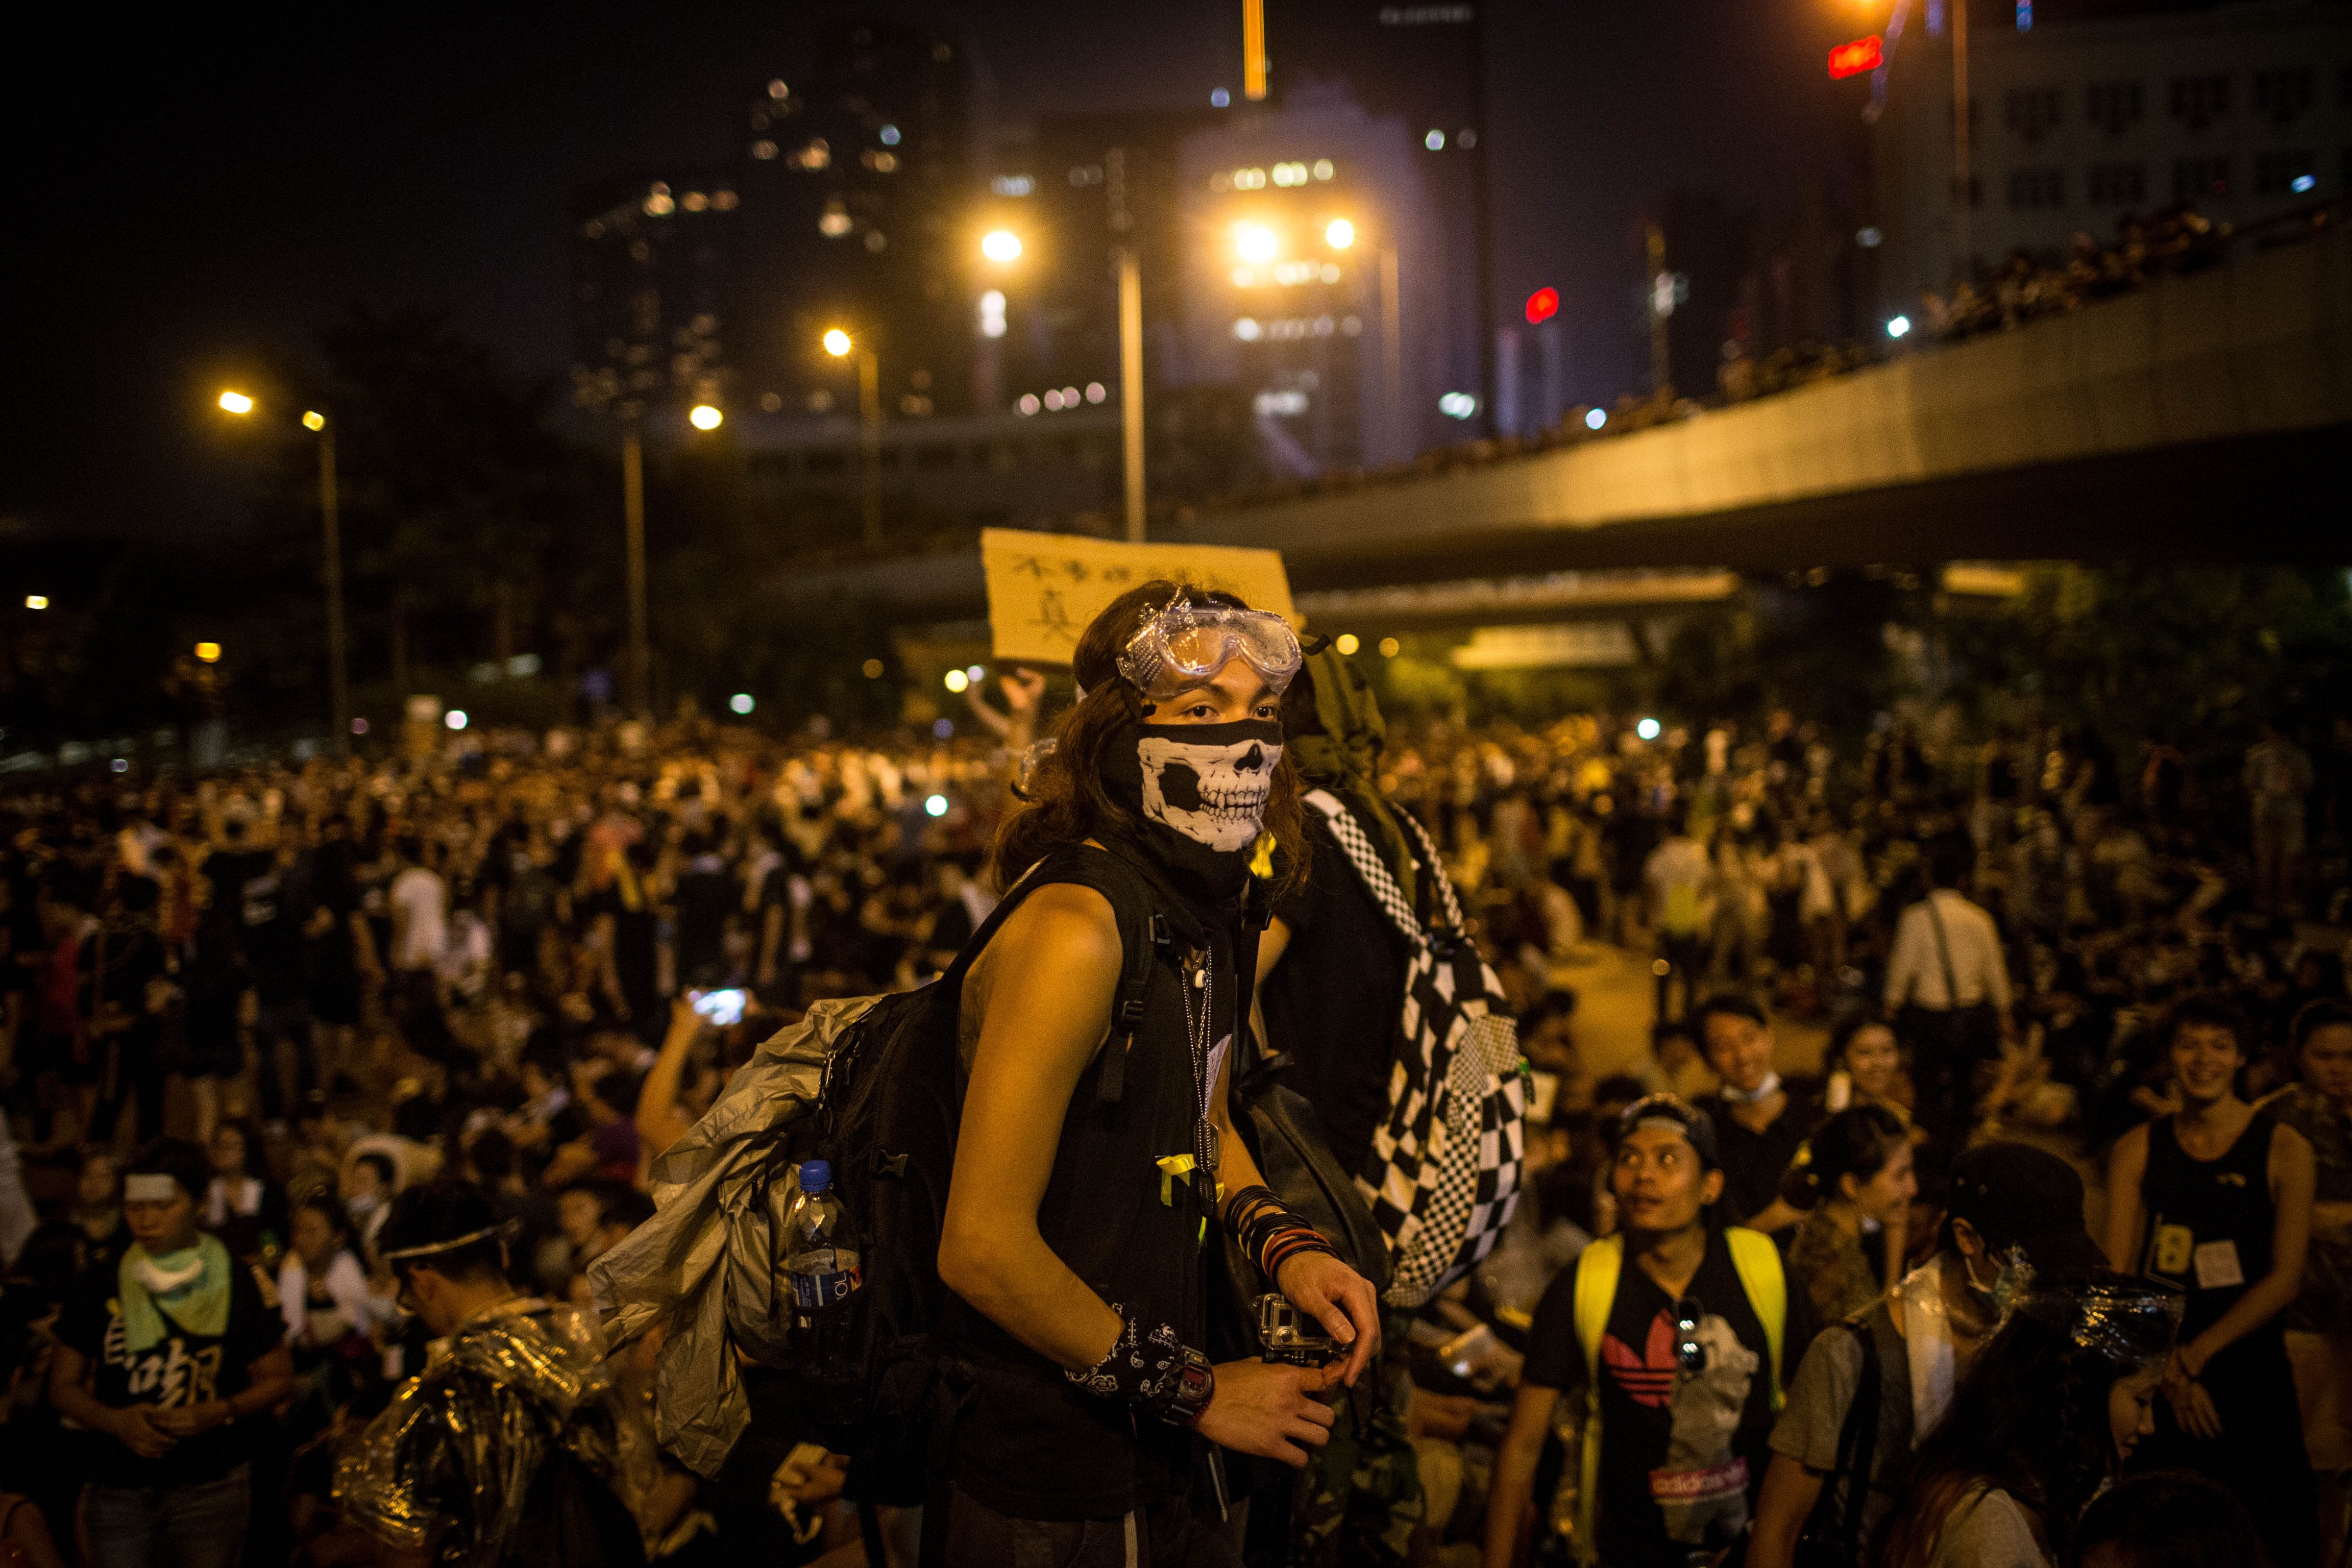 Protesters gather in the streets outside the Hong Kong government complex in Hong Kong on Sept. 29, 2014 (Chris McGrath—Getty Images)